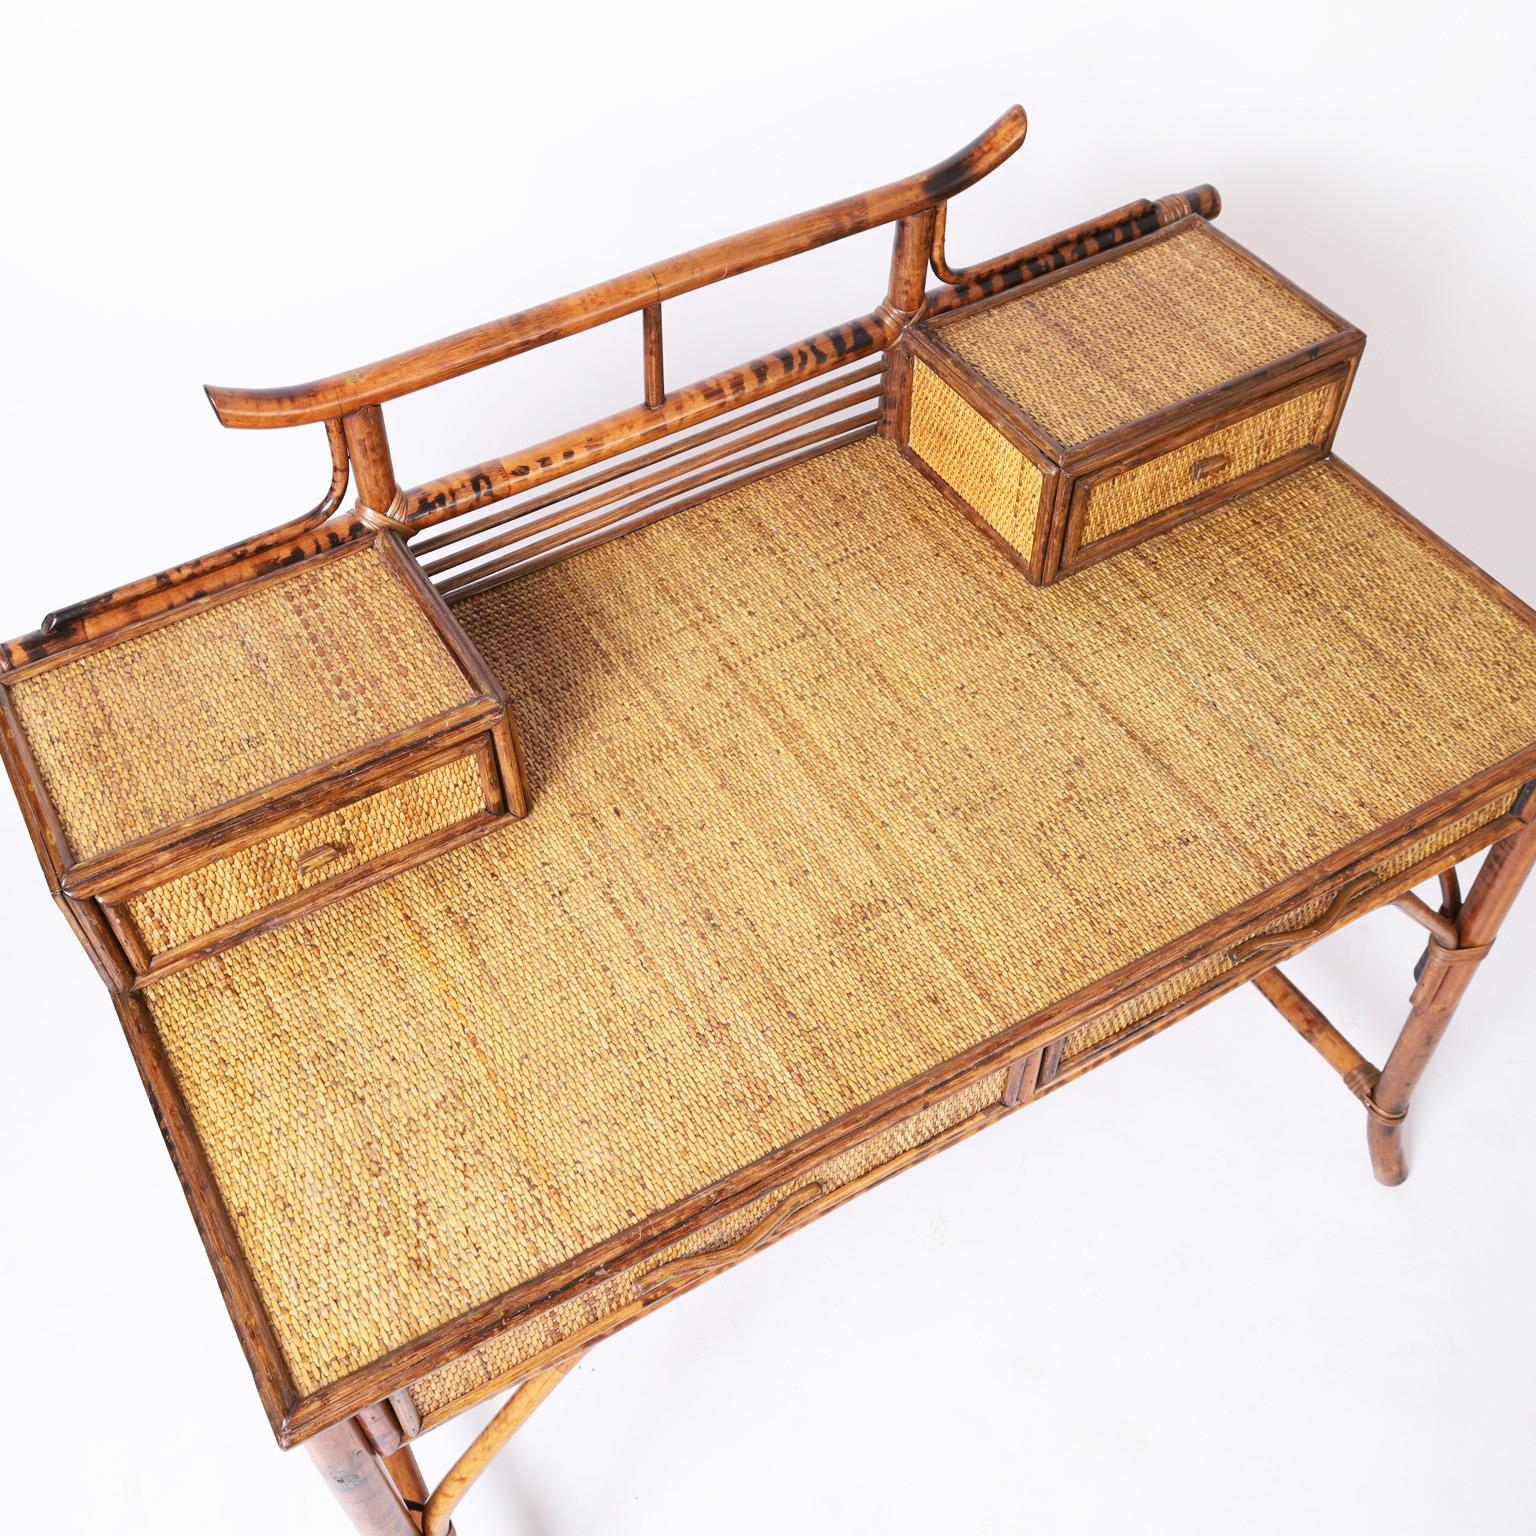 Hand-Crafted British Colonial Style Burnt Bamboo and Grasscloth Pagoda Desk and Chair